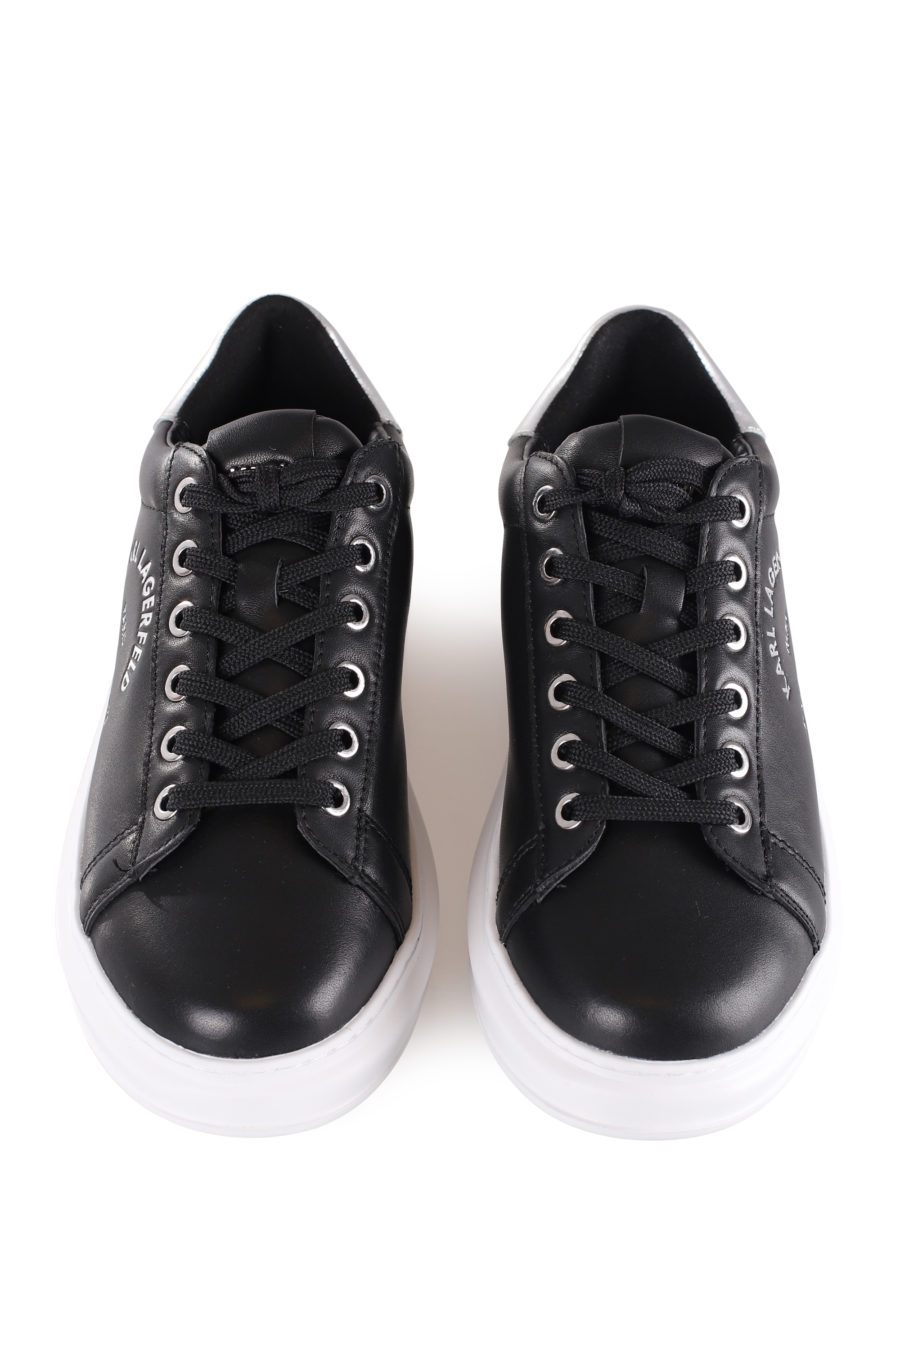 Black trainers with silver logo and platform - IMG 9597